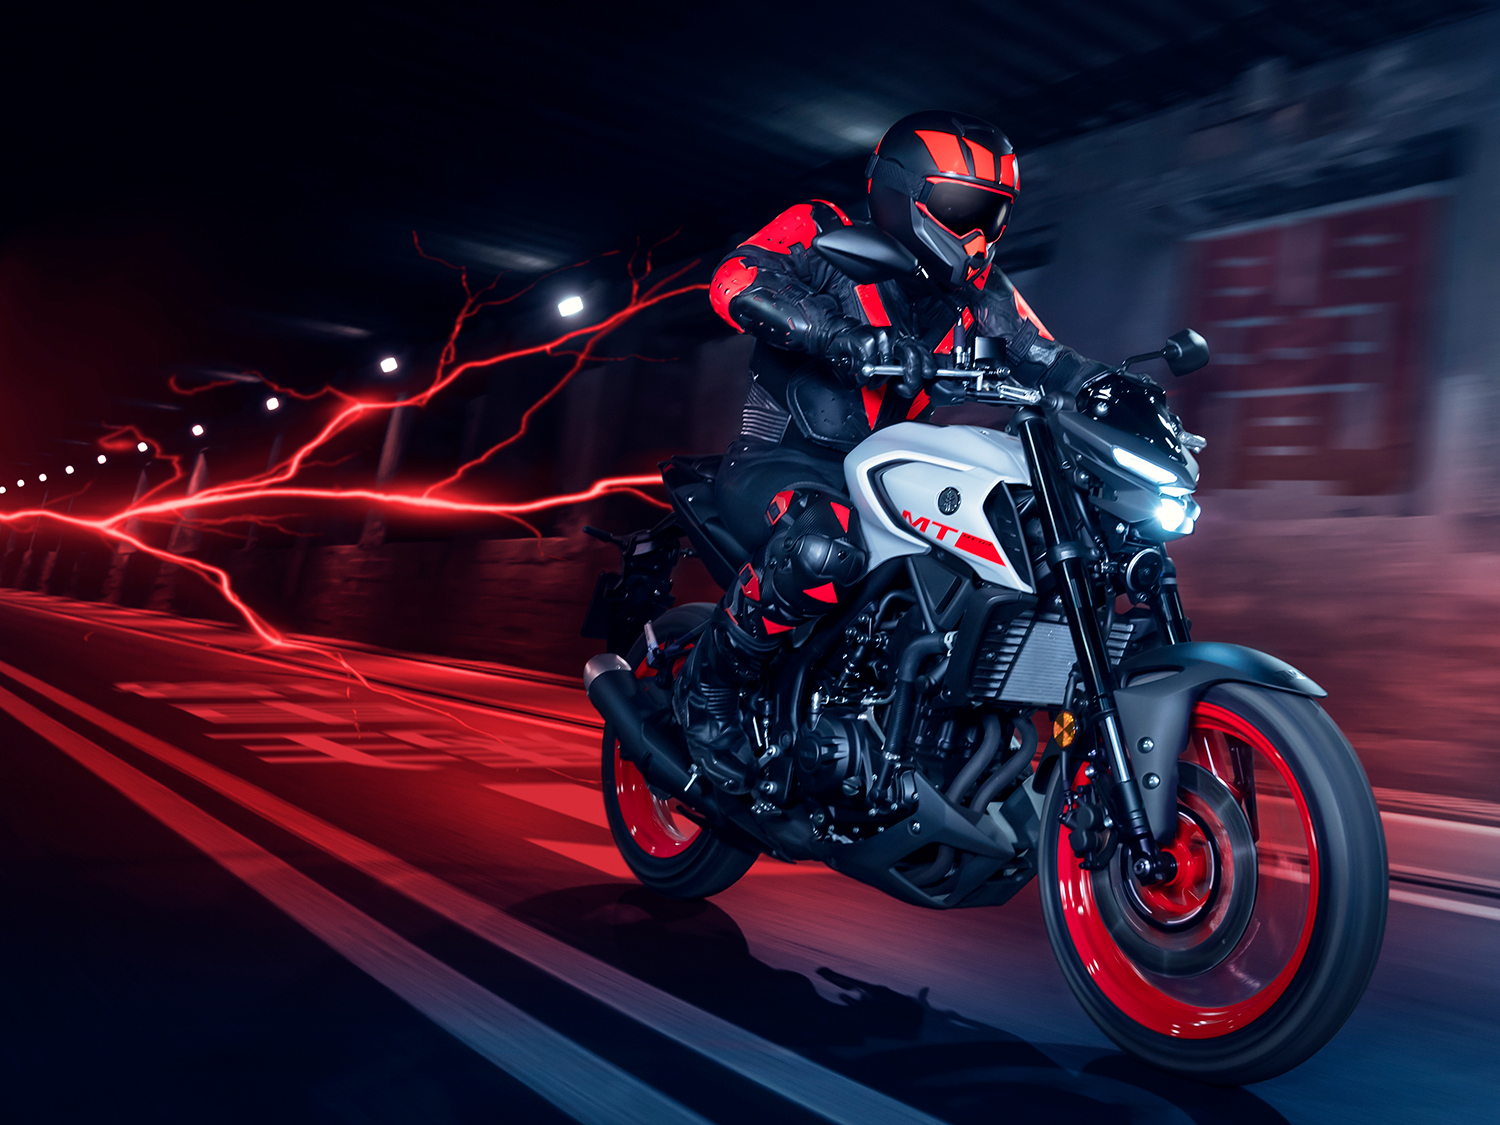 2020 Yamaha Mt-03 First Look Preview | Motorcyclist